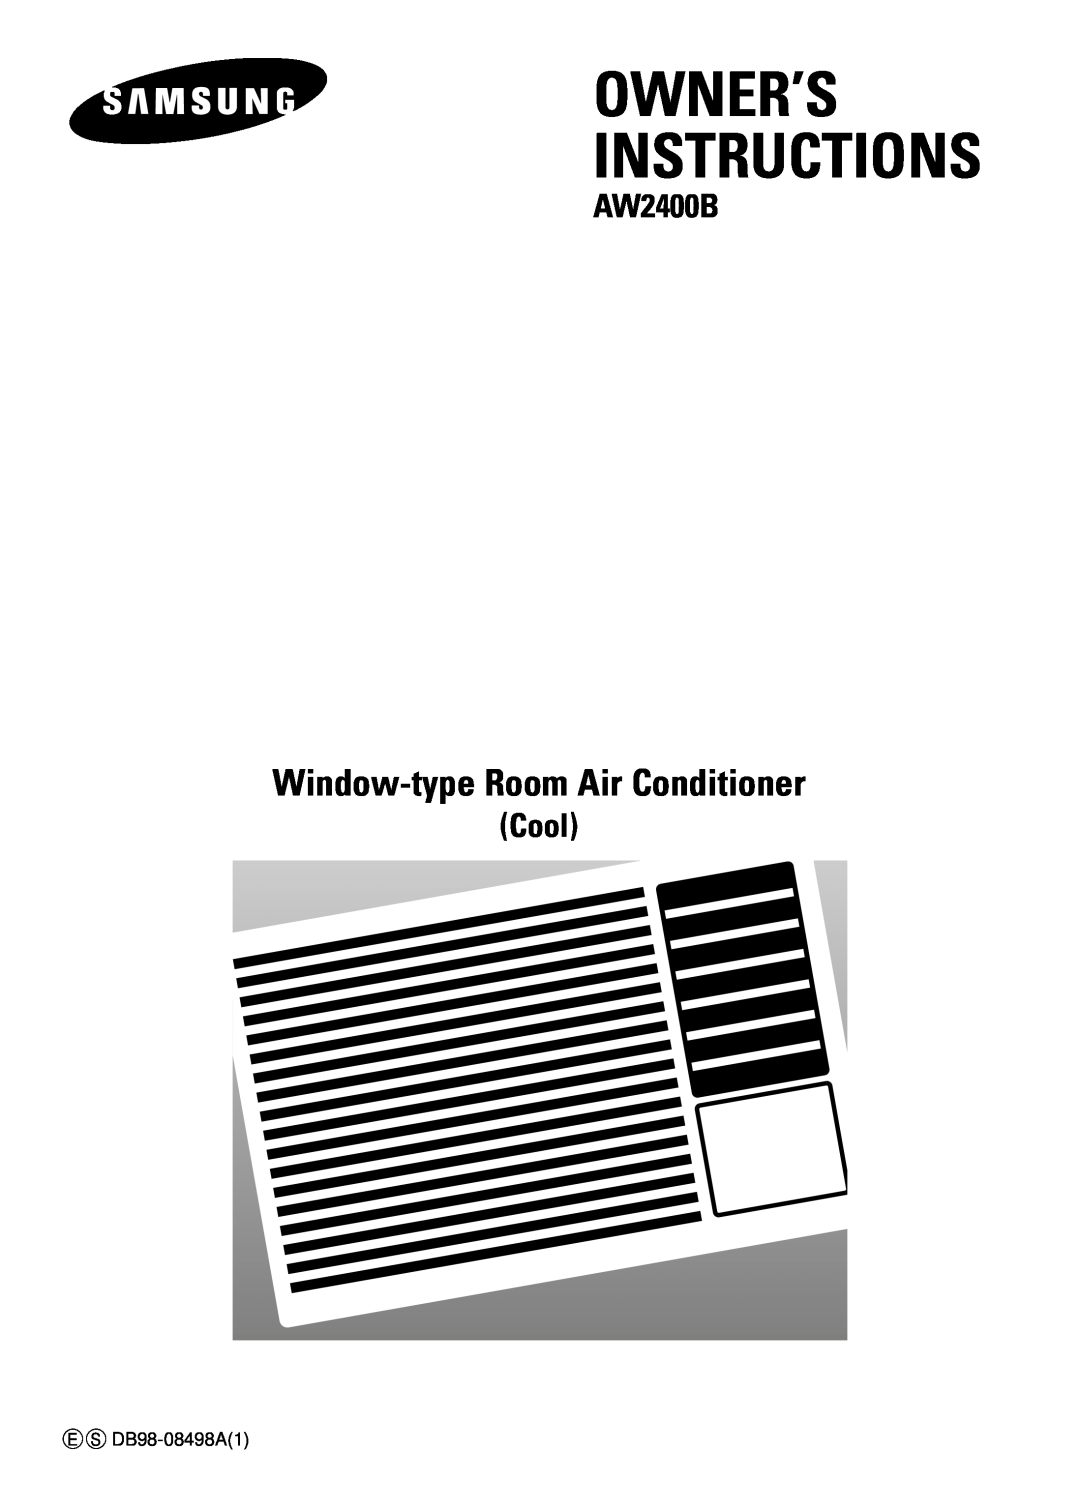 Samsung AW2400B manual Owner’S Instructions, Window-typeRoom Air Conditioner, Cool 